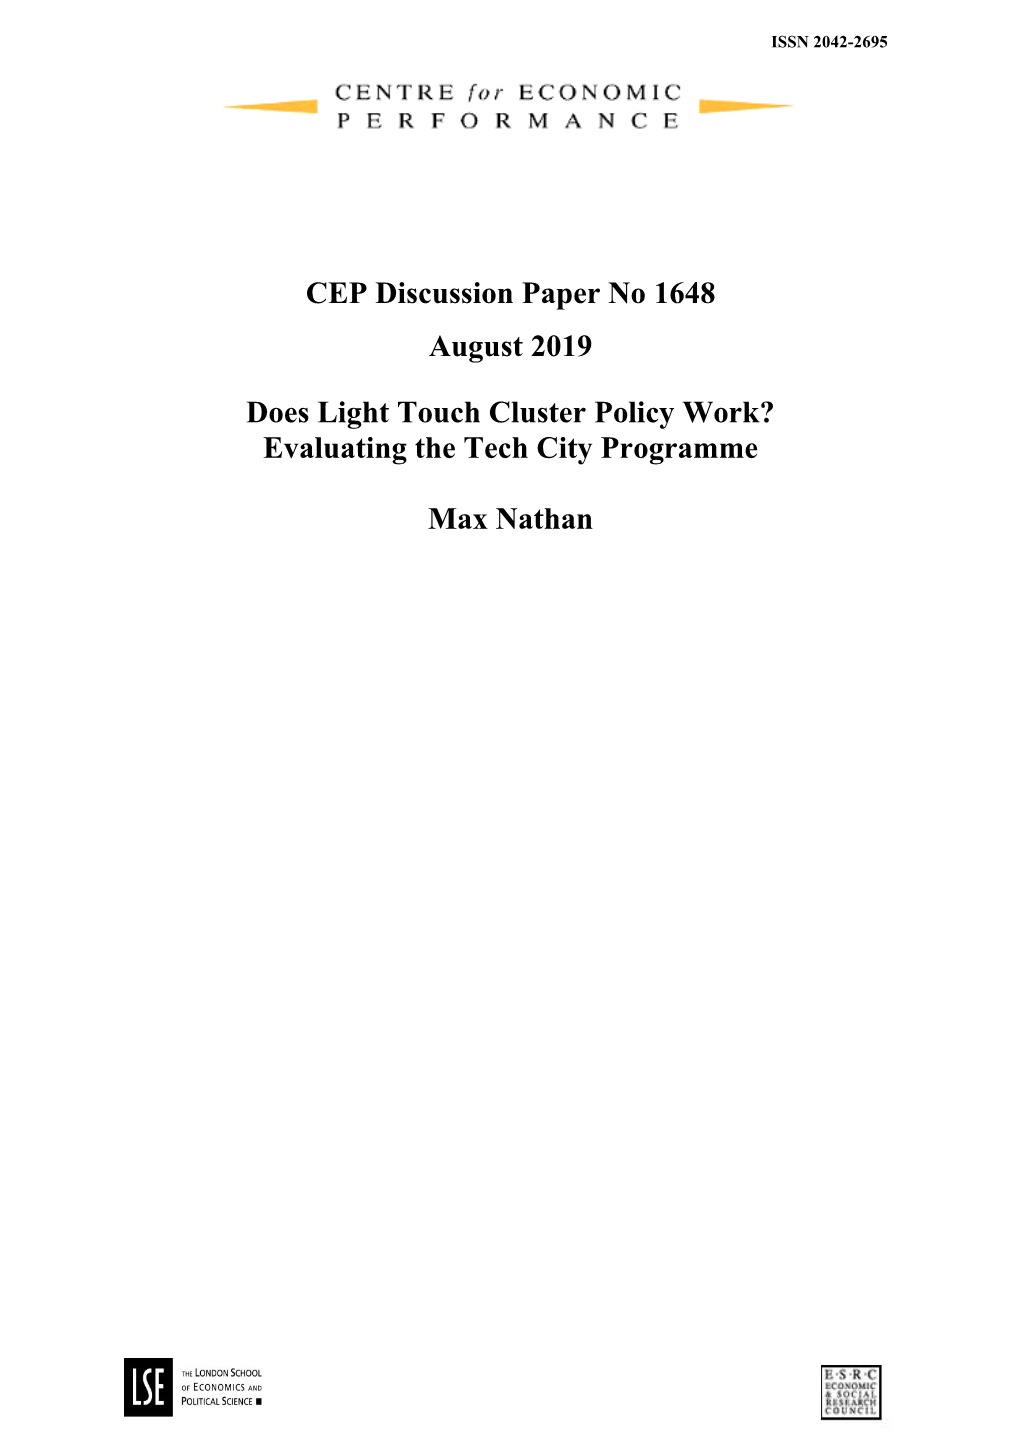 Does Light Touch Cluster Policy Work? Evaluating the Tech City Programme